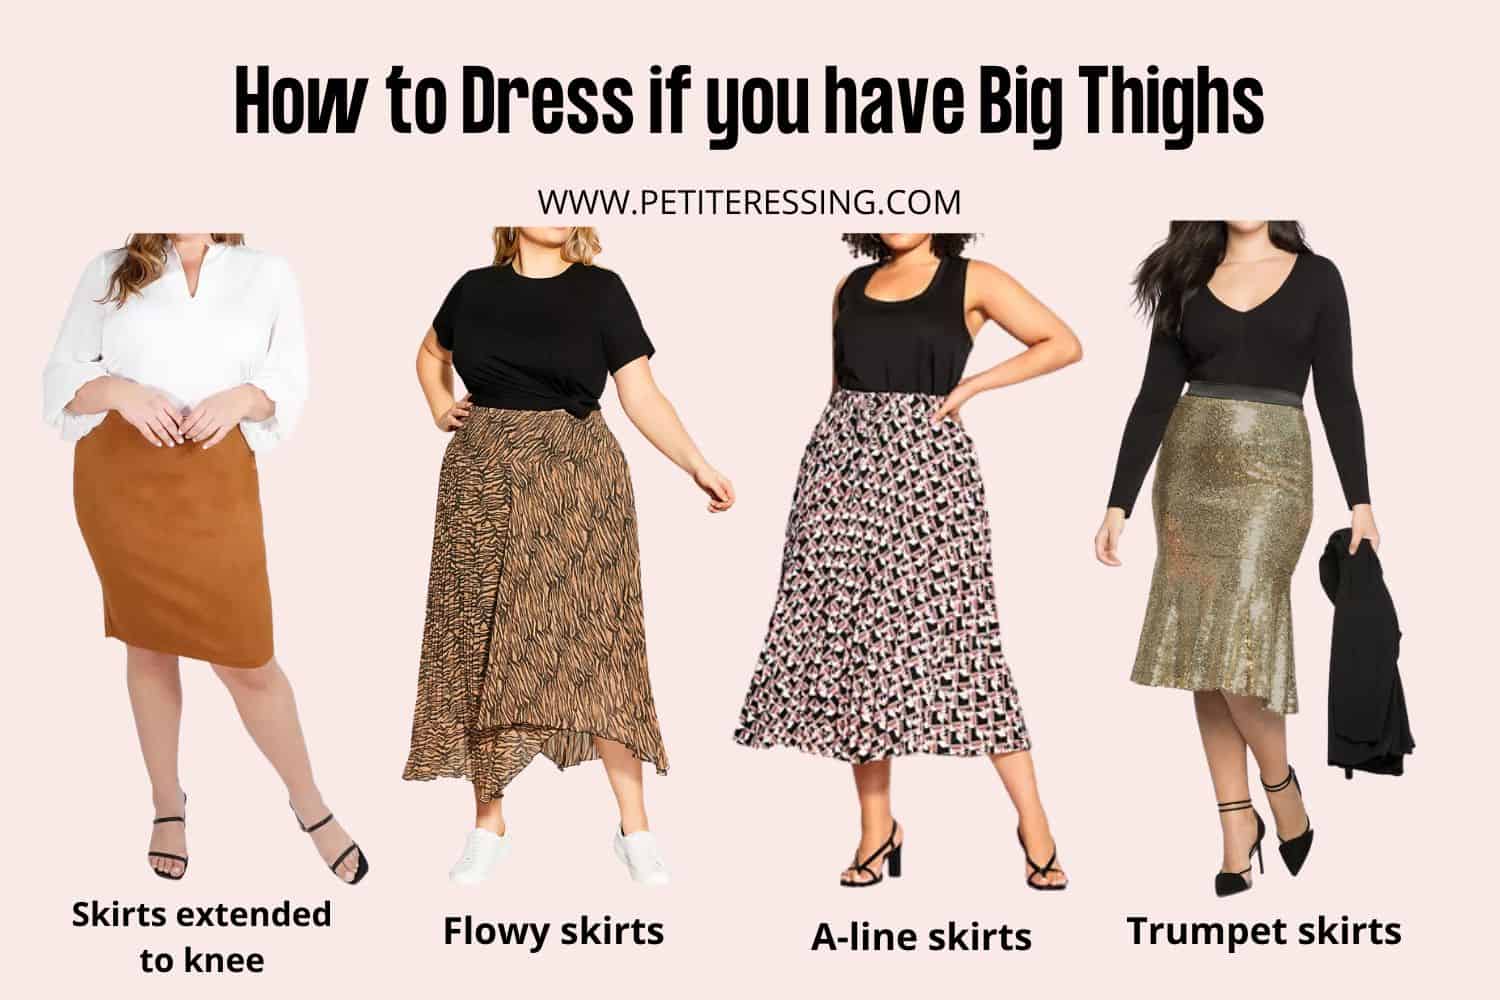 How to Dress if you have Big Thighs (The Complete Guide)